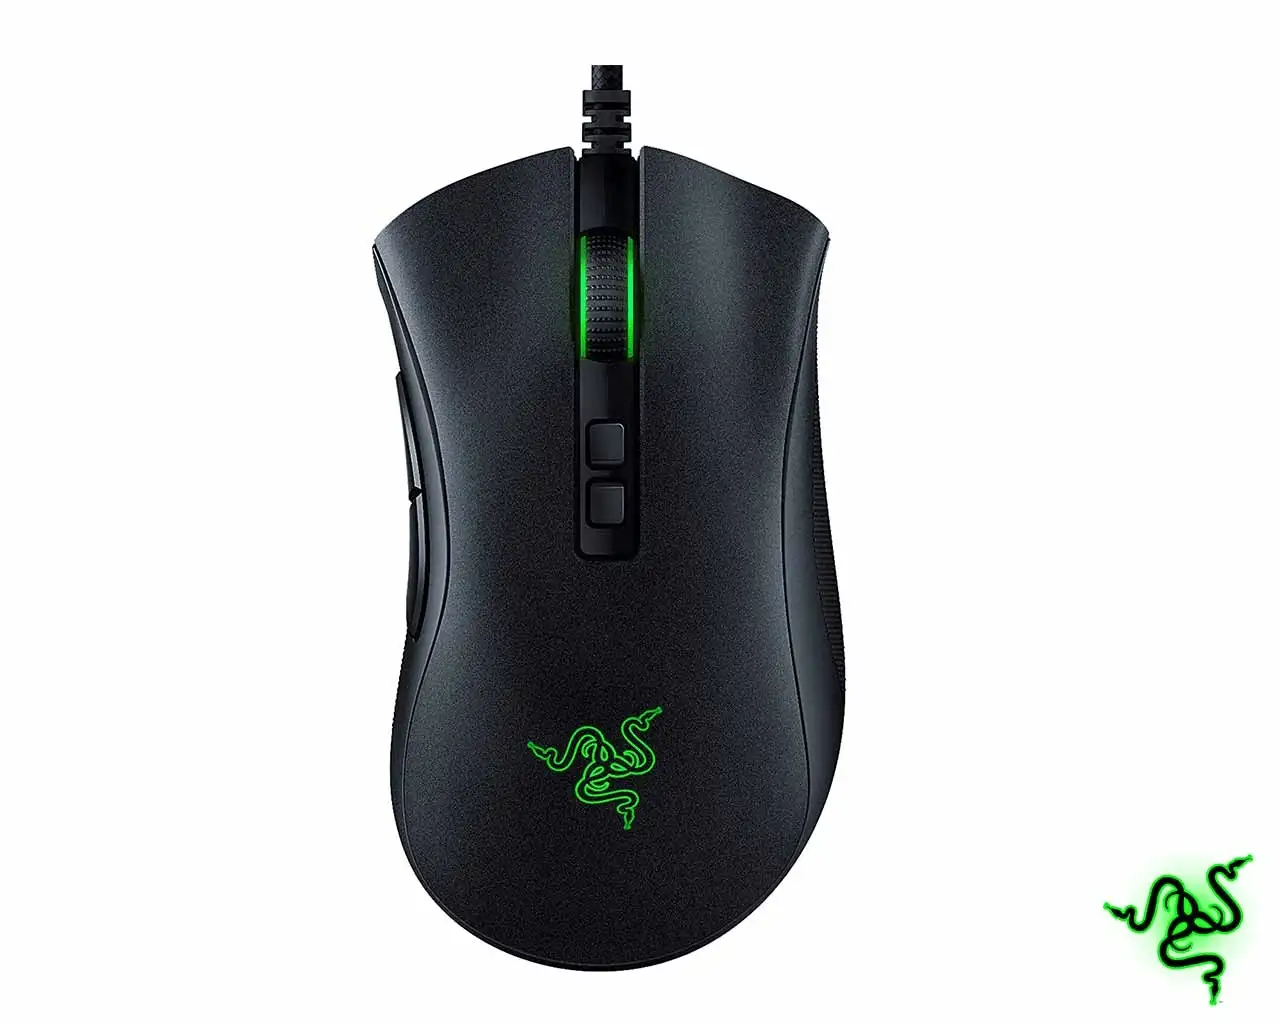 Razer DeathAdder V2 Gaming Mouse with 20000 DPI. with dpi buttons, wheel, logo, and programmable buttons.